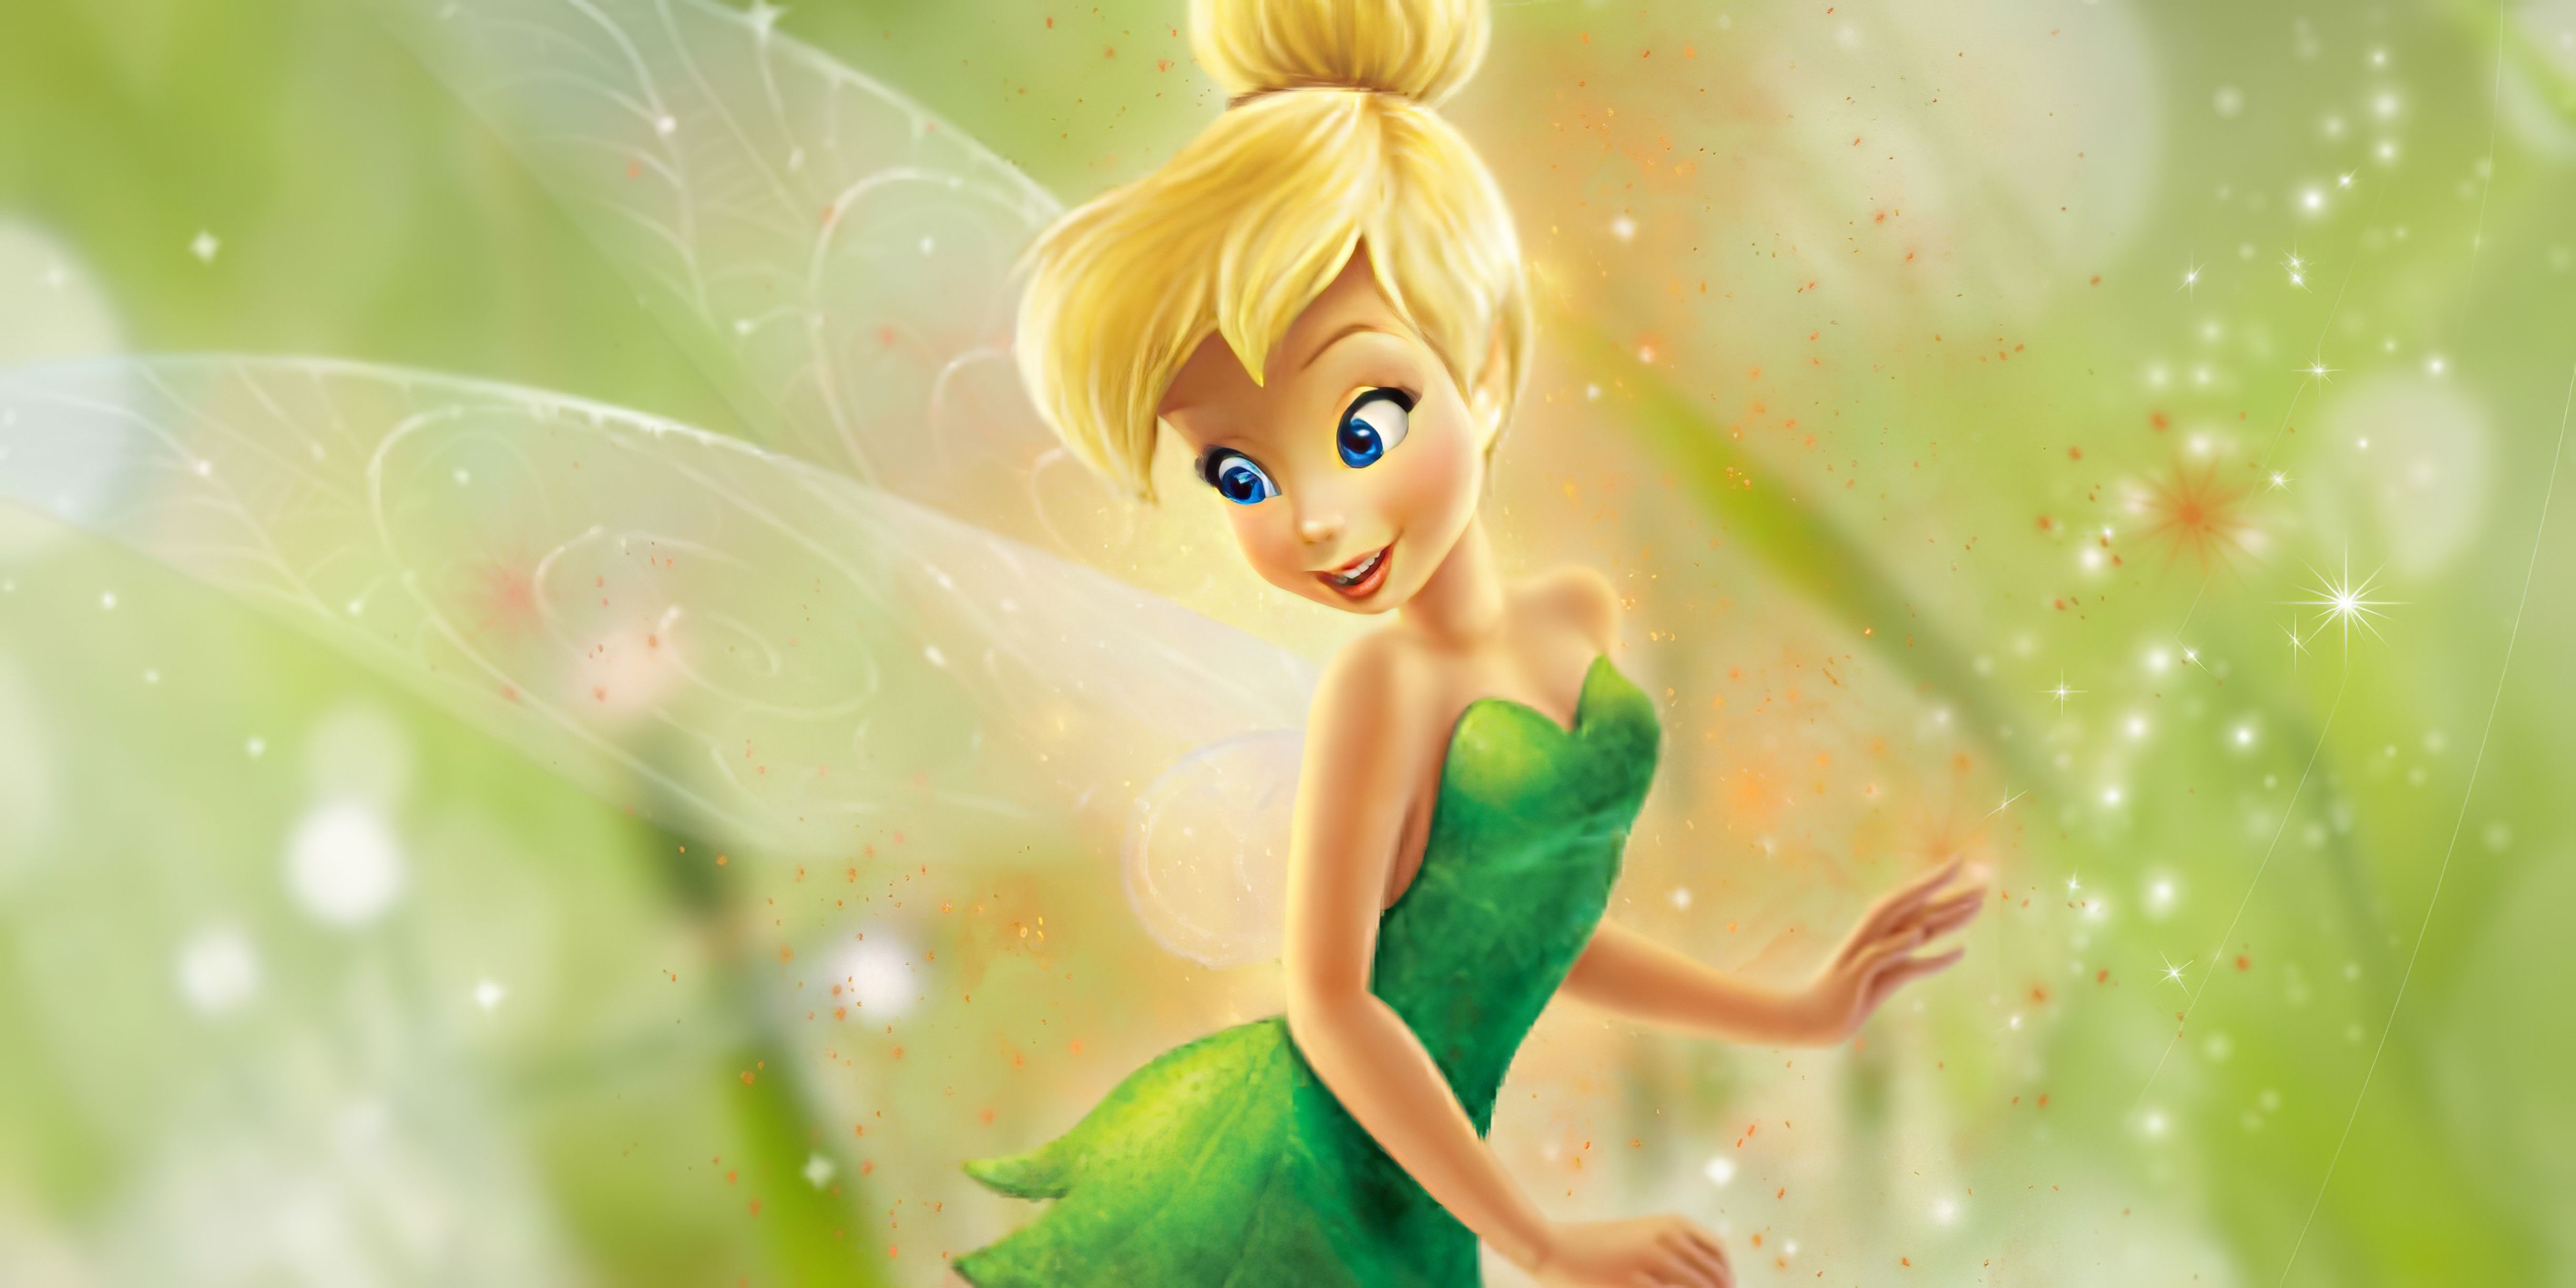 Why Is Tinker Bell the Face of Disney?